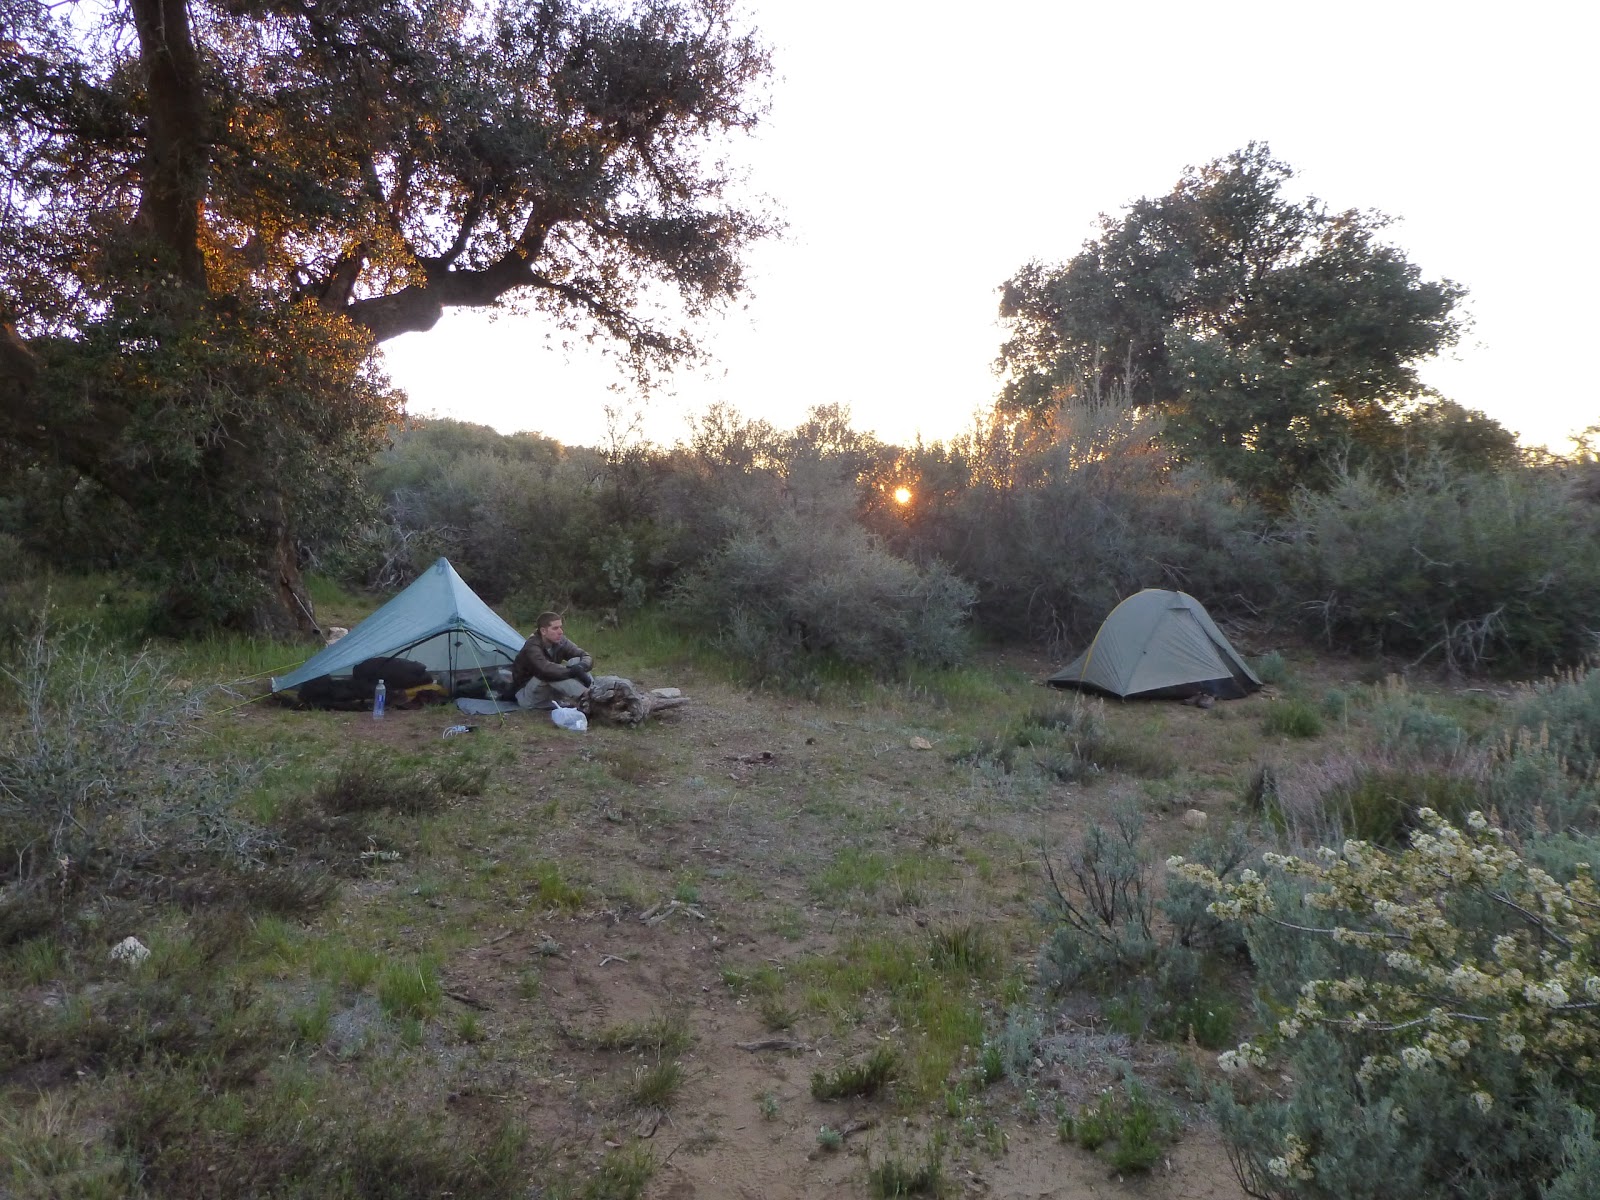 Our campsite for the day